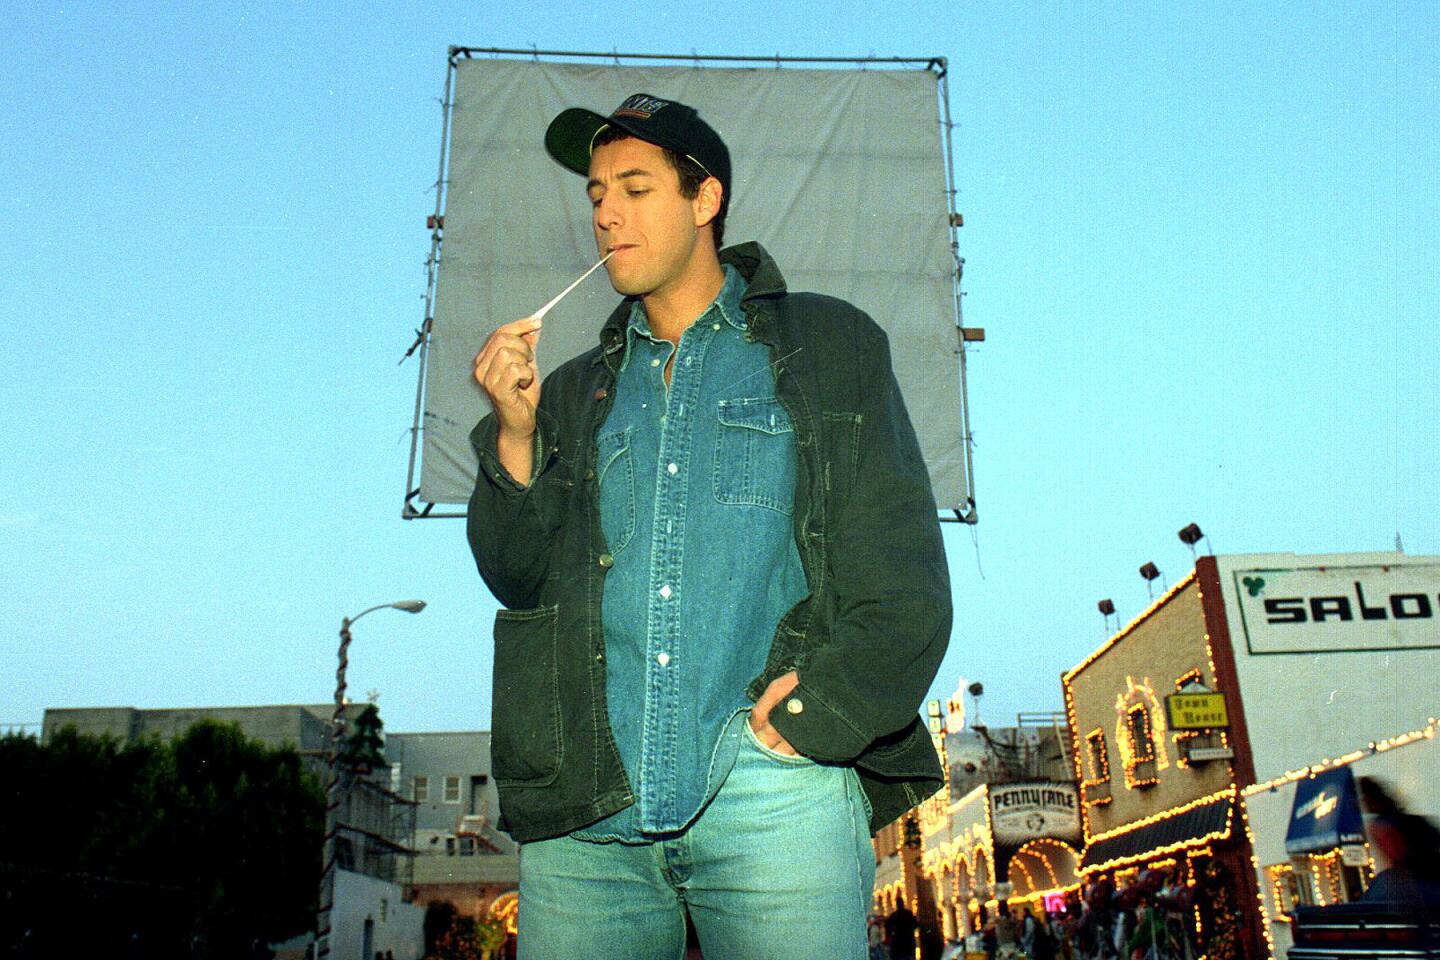 Humble beginnings In 1990, before he became a movie star, Adam Sandler was stoked to be cast as Drug Dealer in an ABC Afterschool Special."